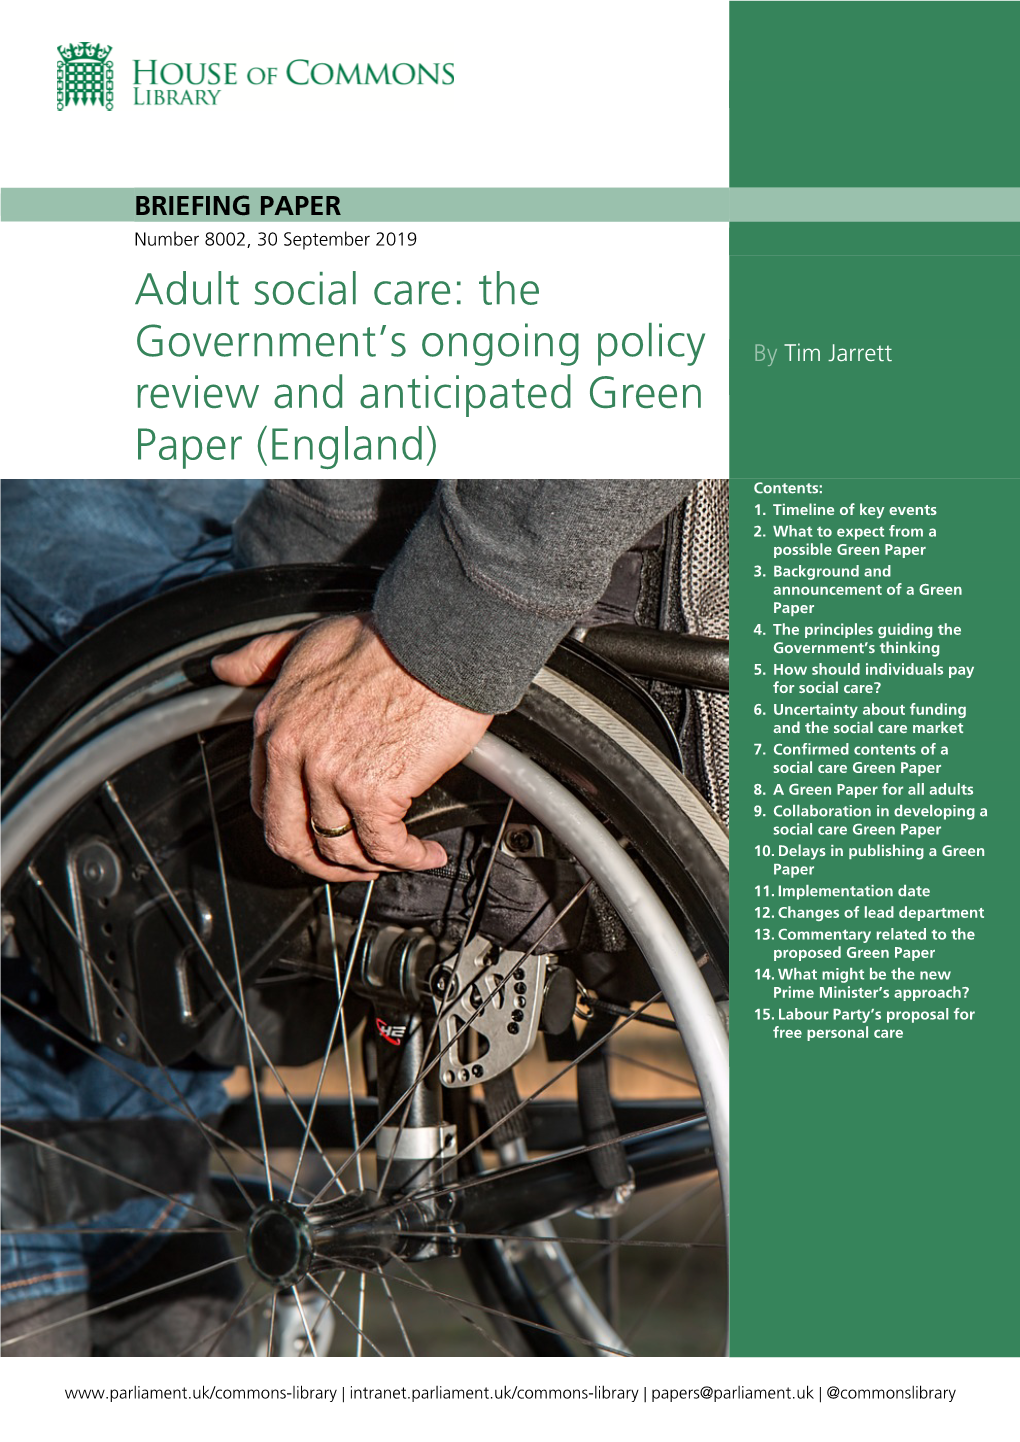 Adult Social Care: the Government's Ongoing Policy Review and Anticipated Green Paper (England)